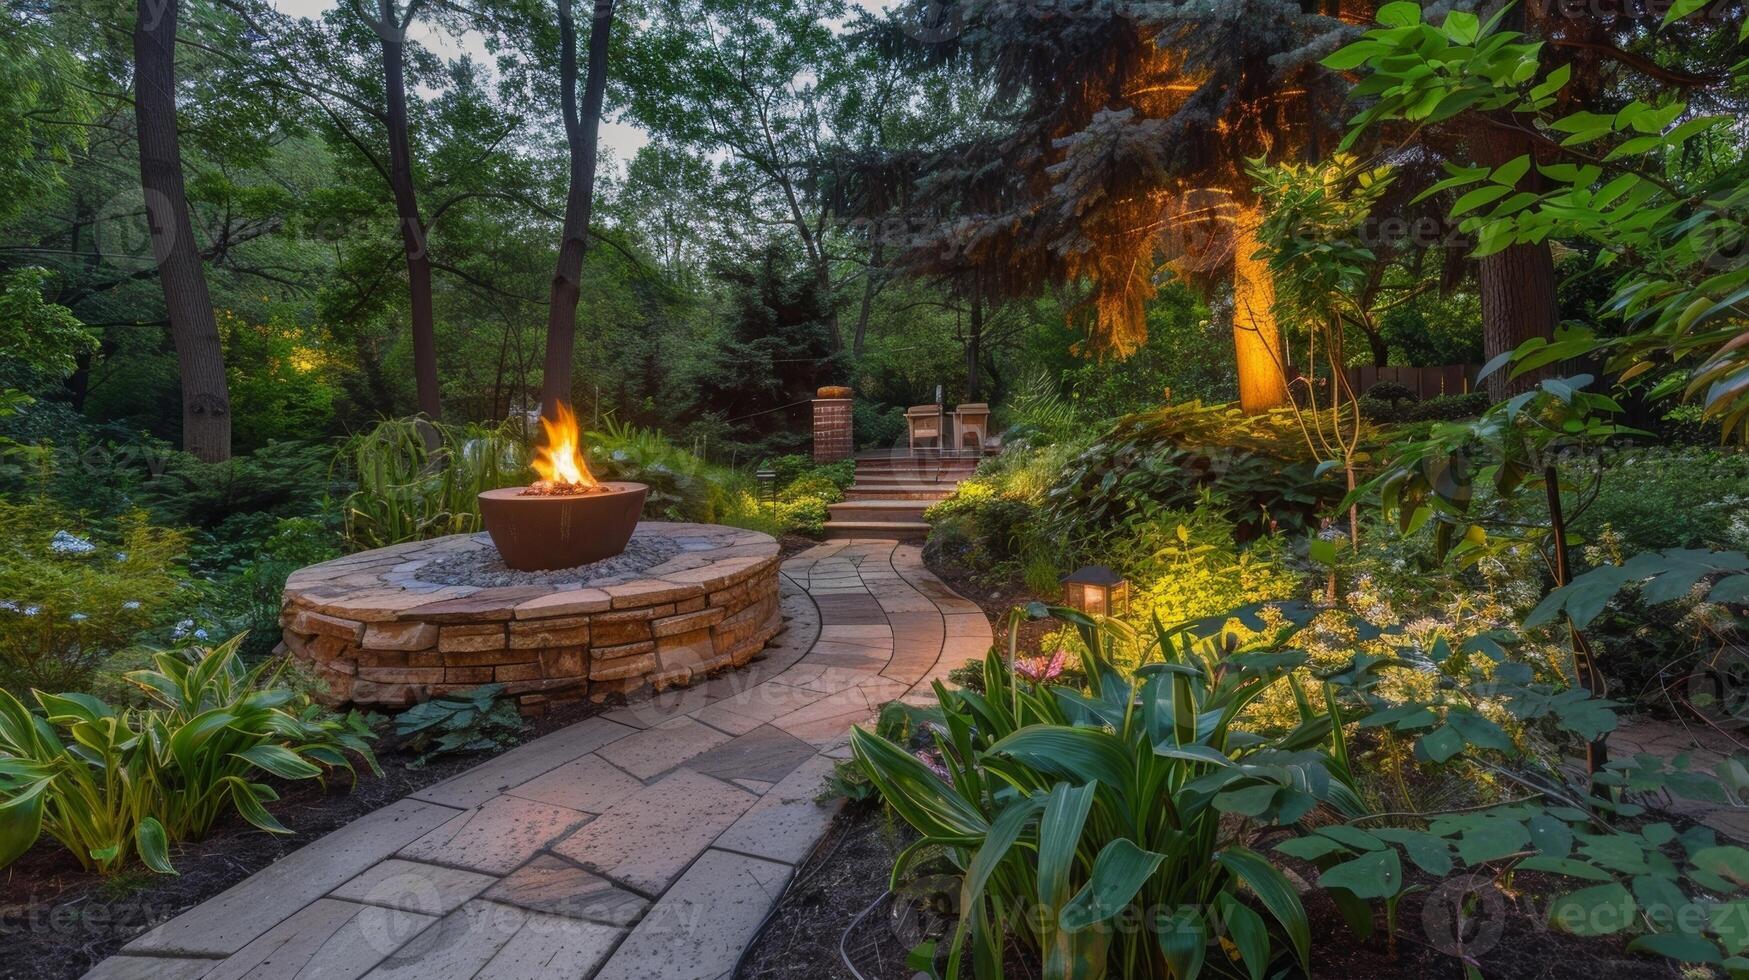 The garden pathway leads to a striking fire feature creating a mesmerizing focal point against the lush greenery. 2d flat cartoon photo